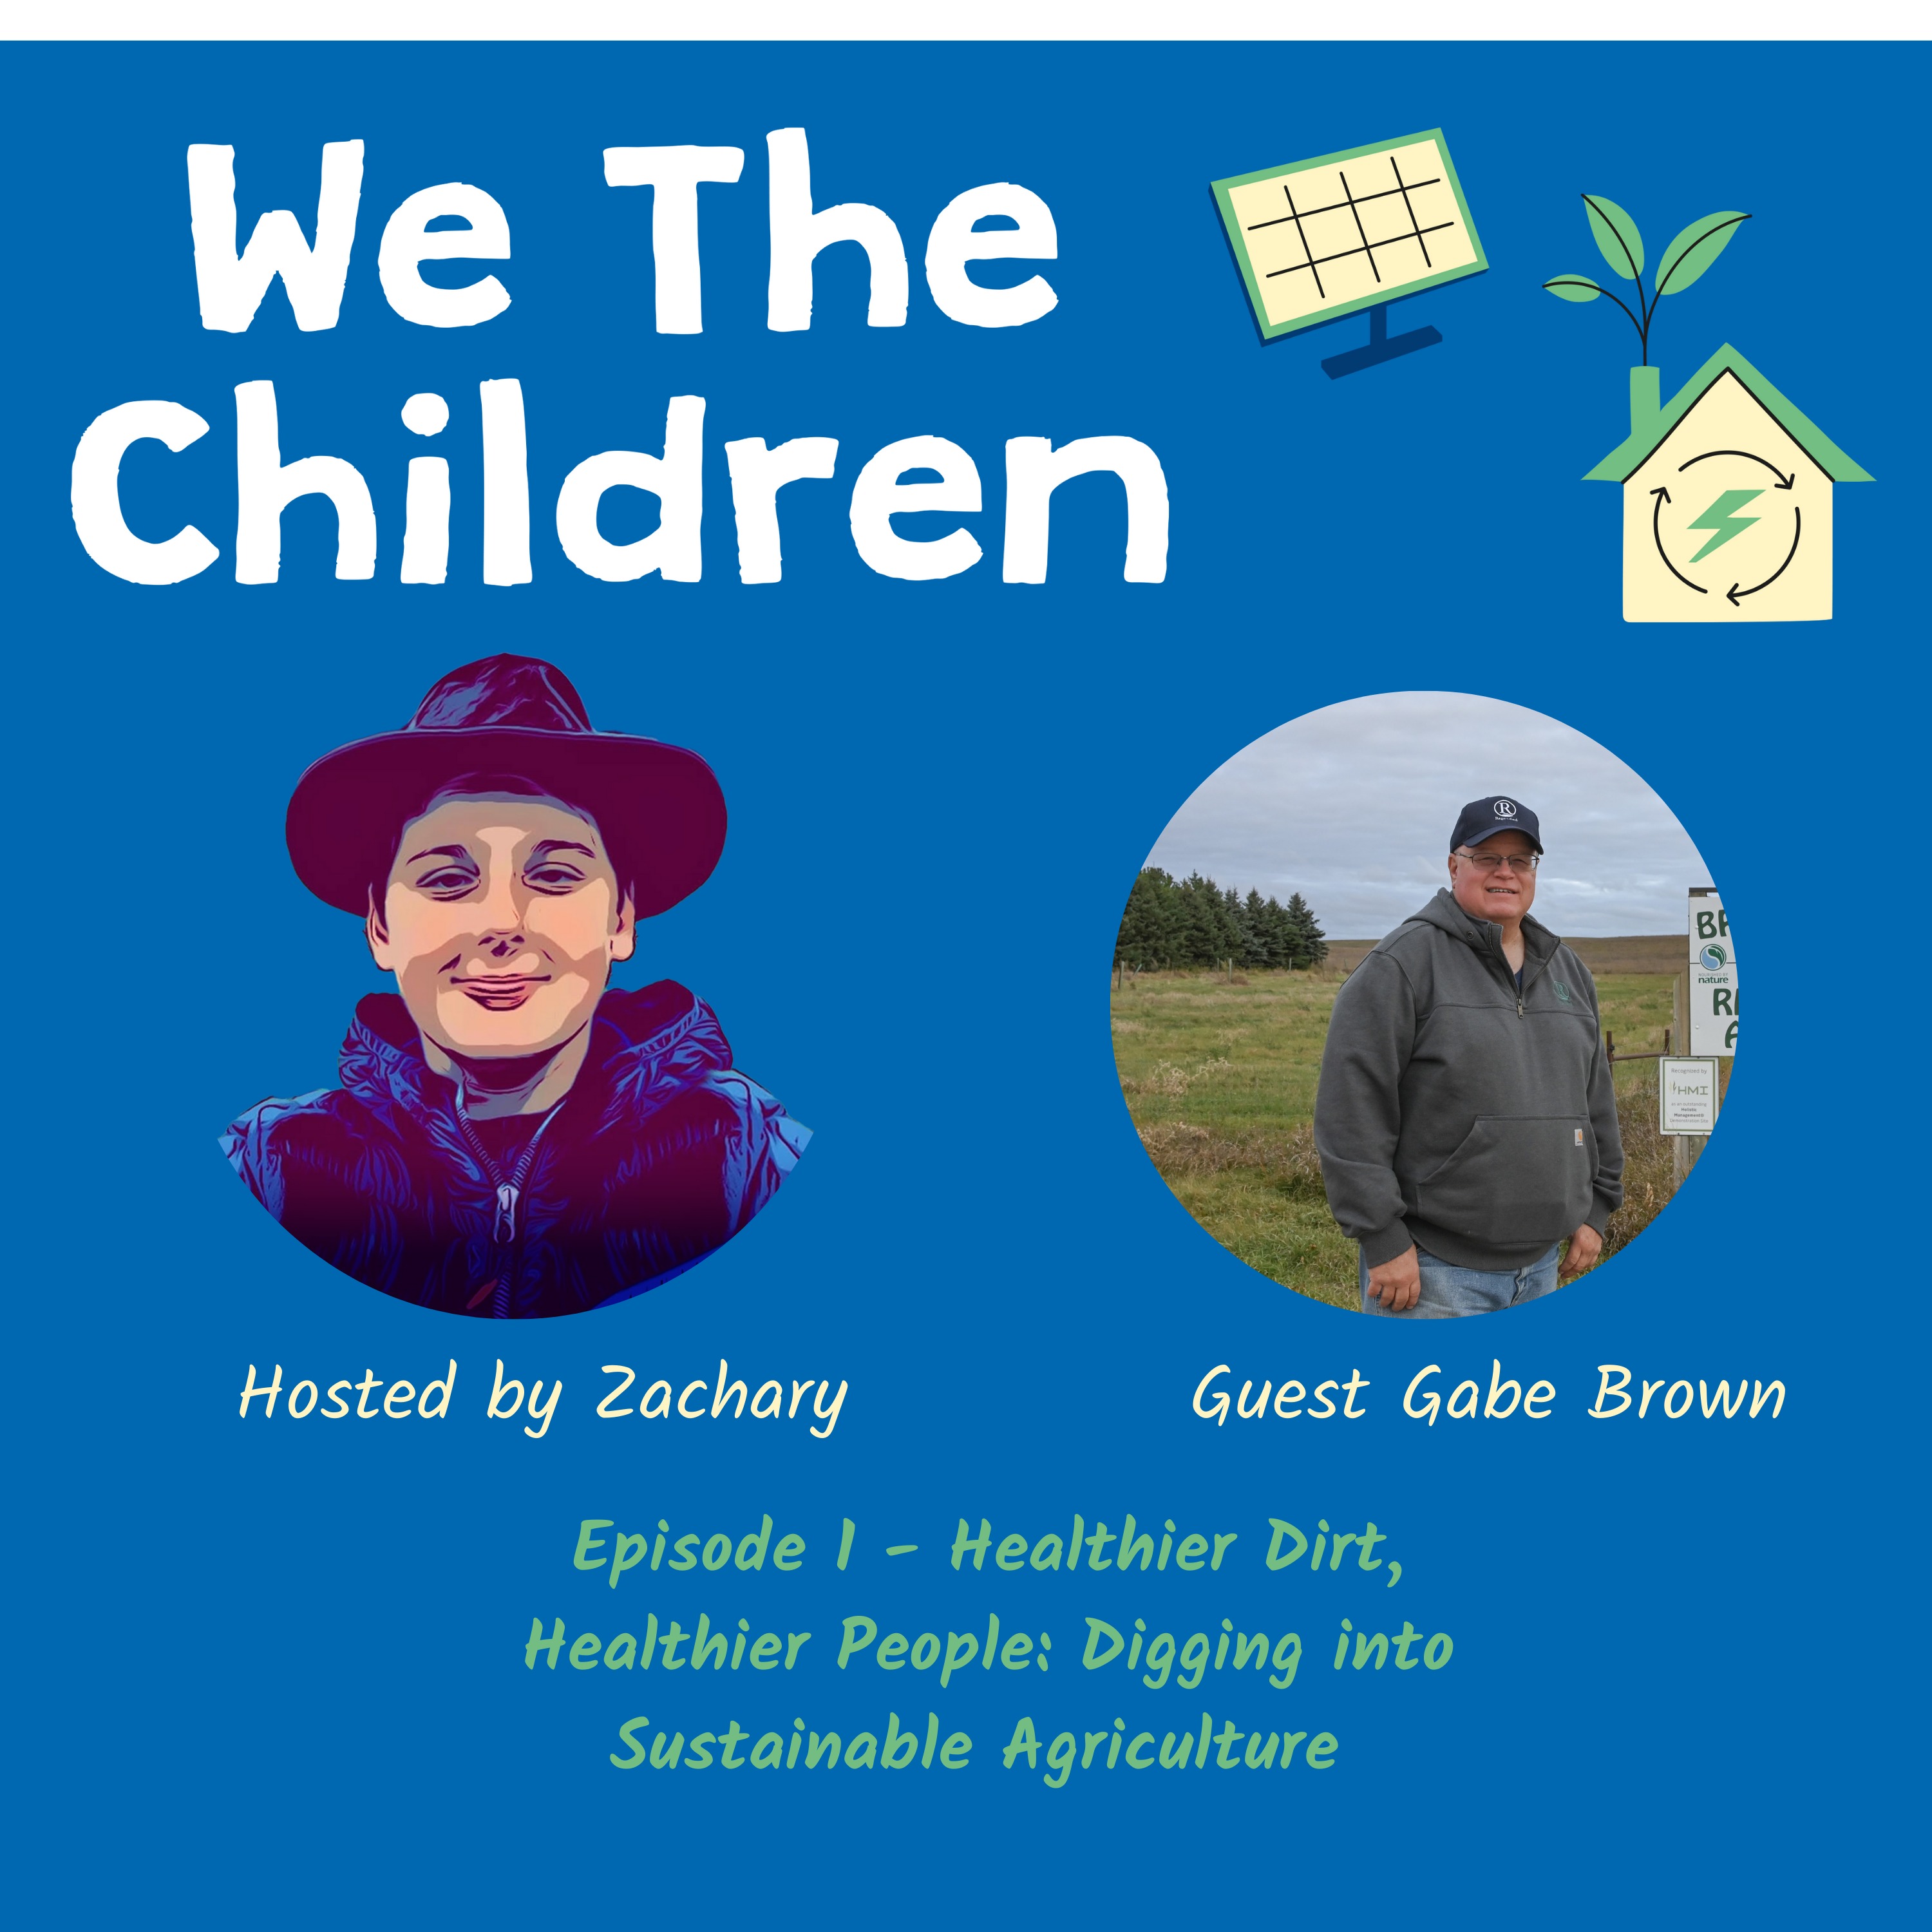 Healthier Dirt, Healthier People: Digging into Sustainable Agriculture with Gabe Brown